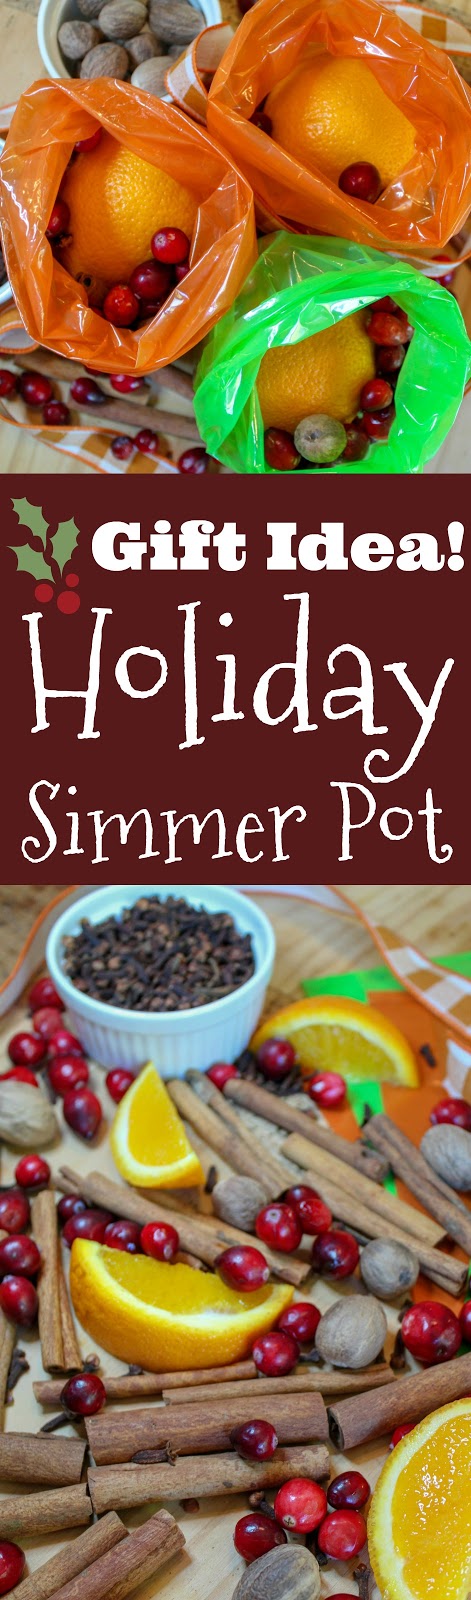 Gift Idea: Holiday Simmer Pot with Delicious Desserts from